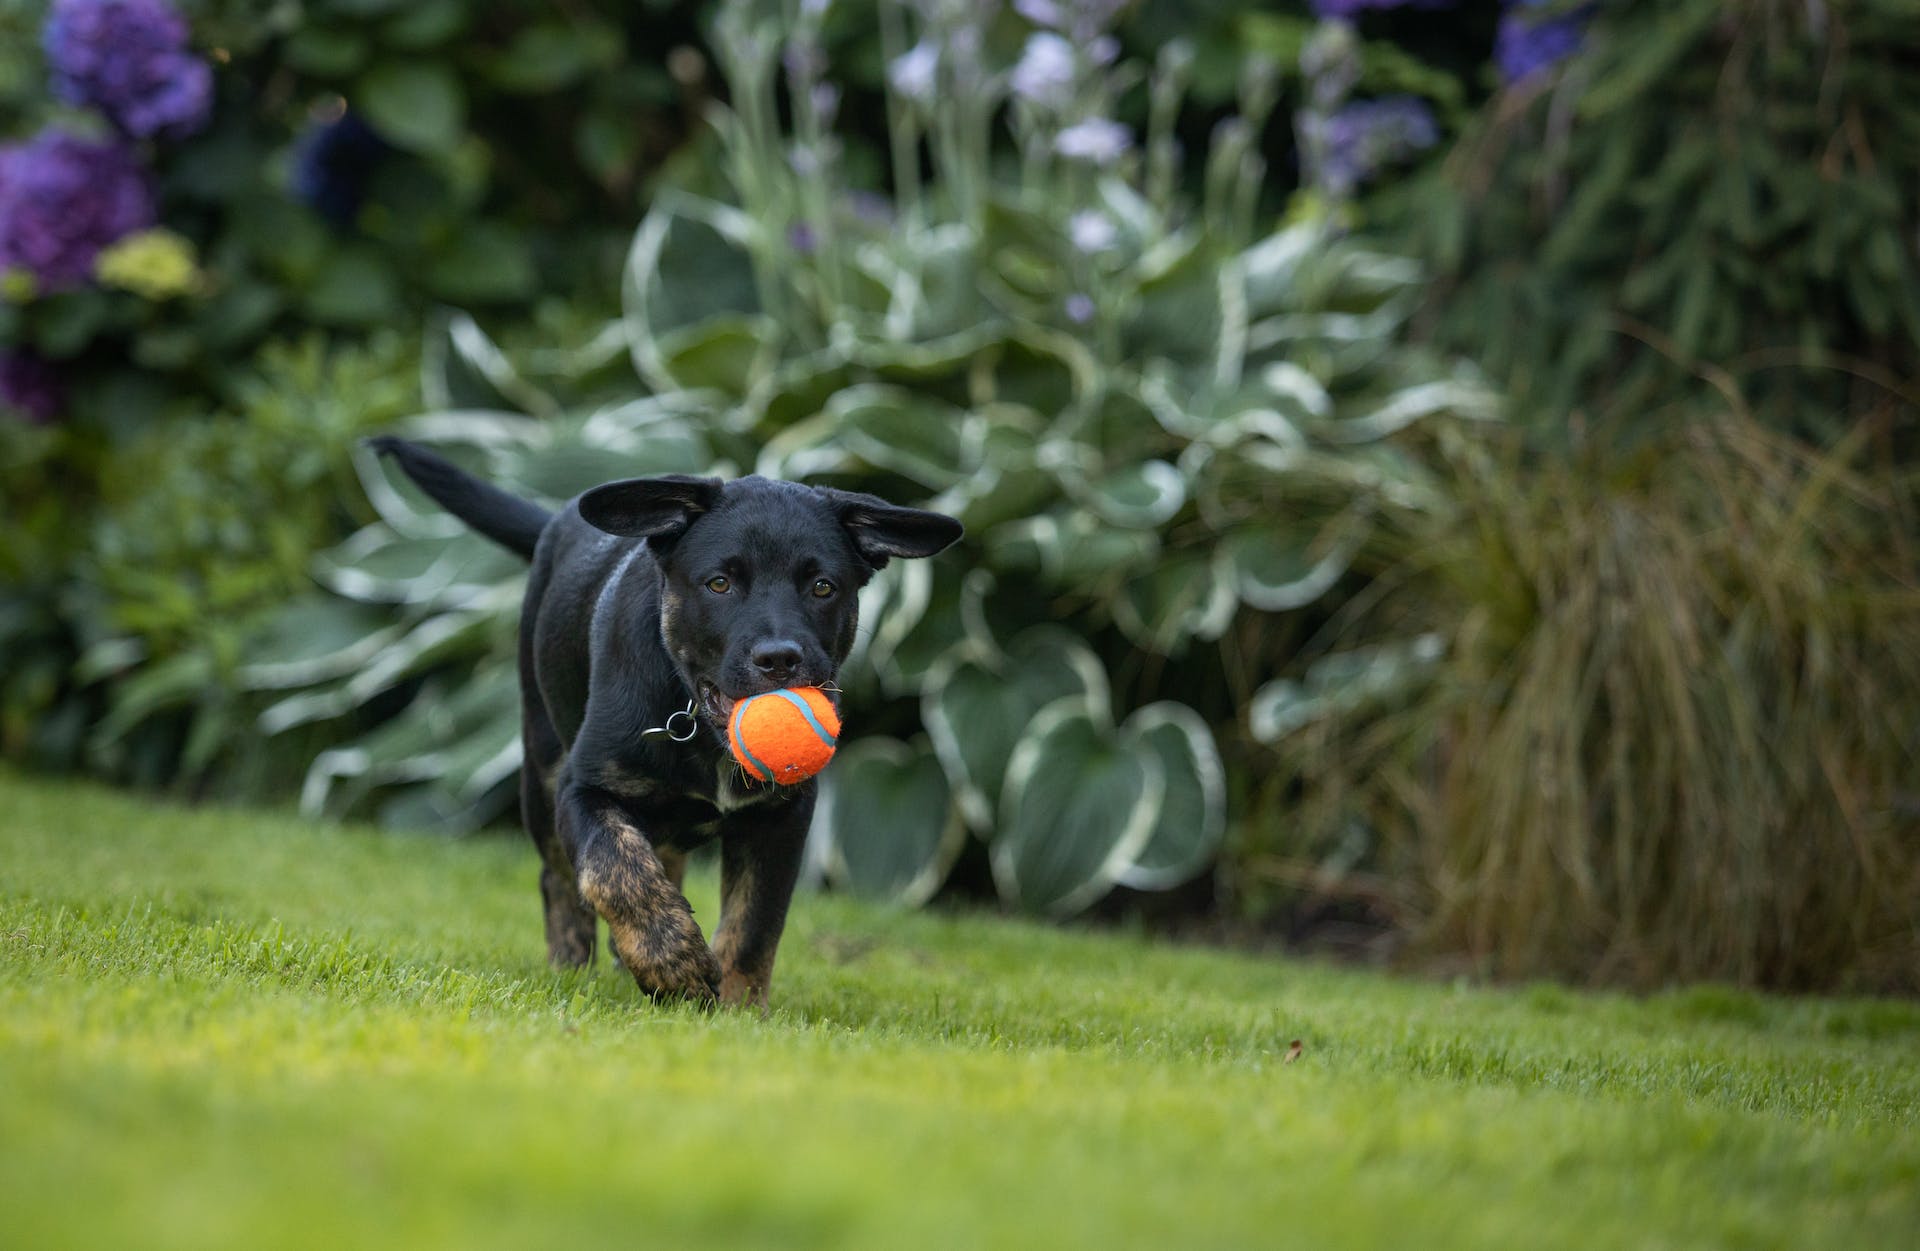 A black puppy carrying an orange ball in their mouth in a garden